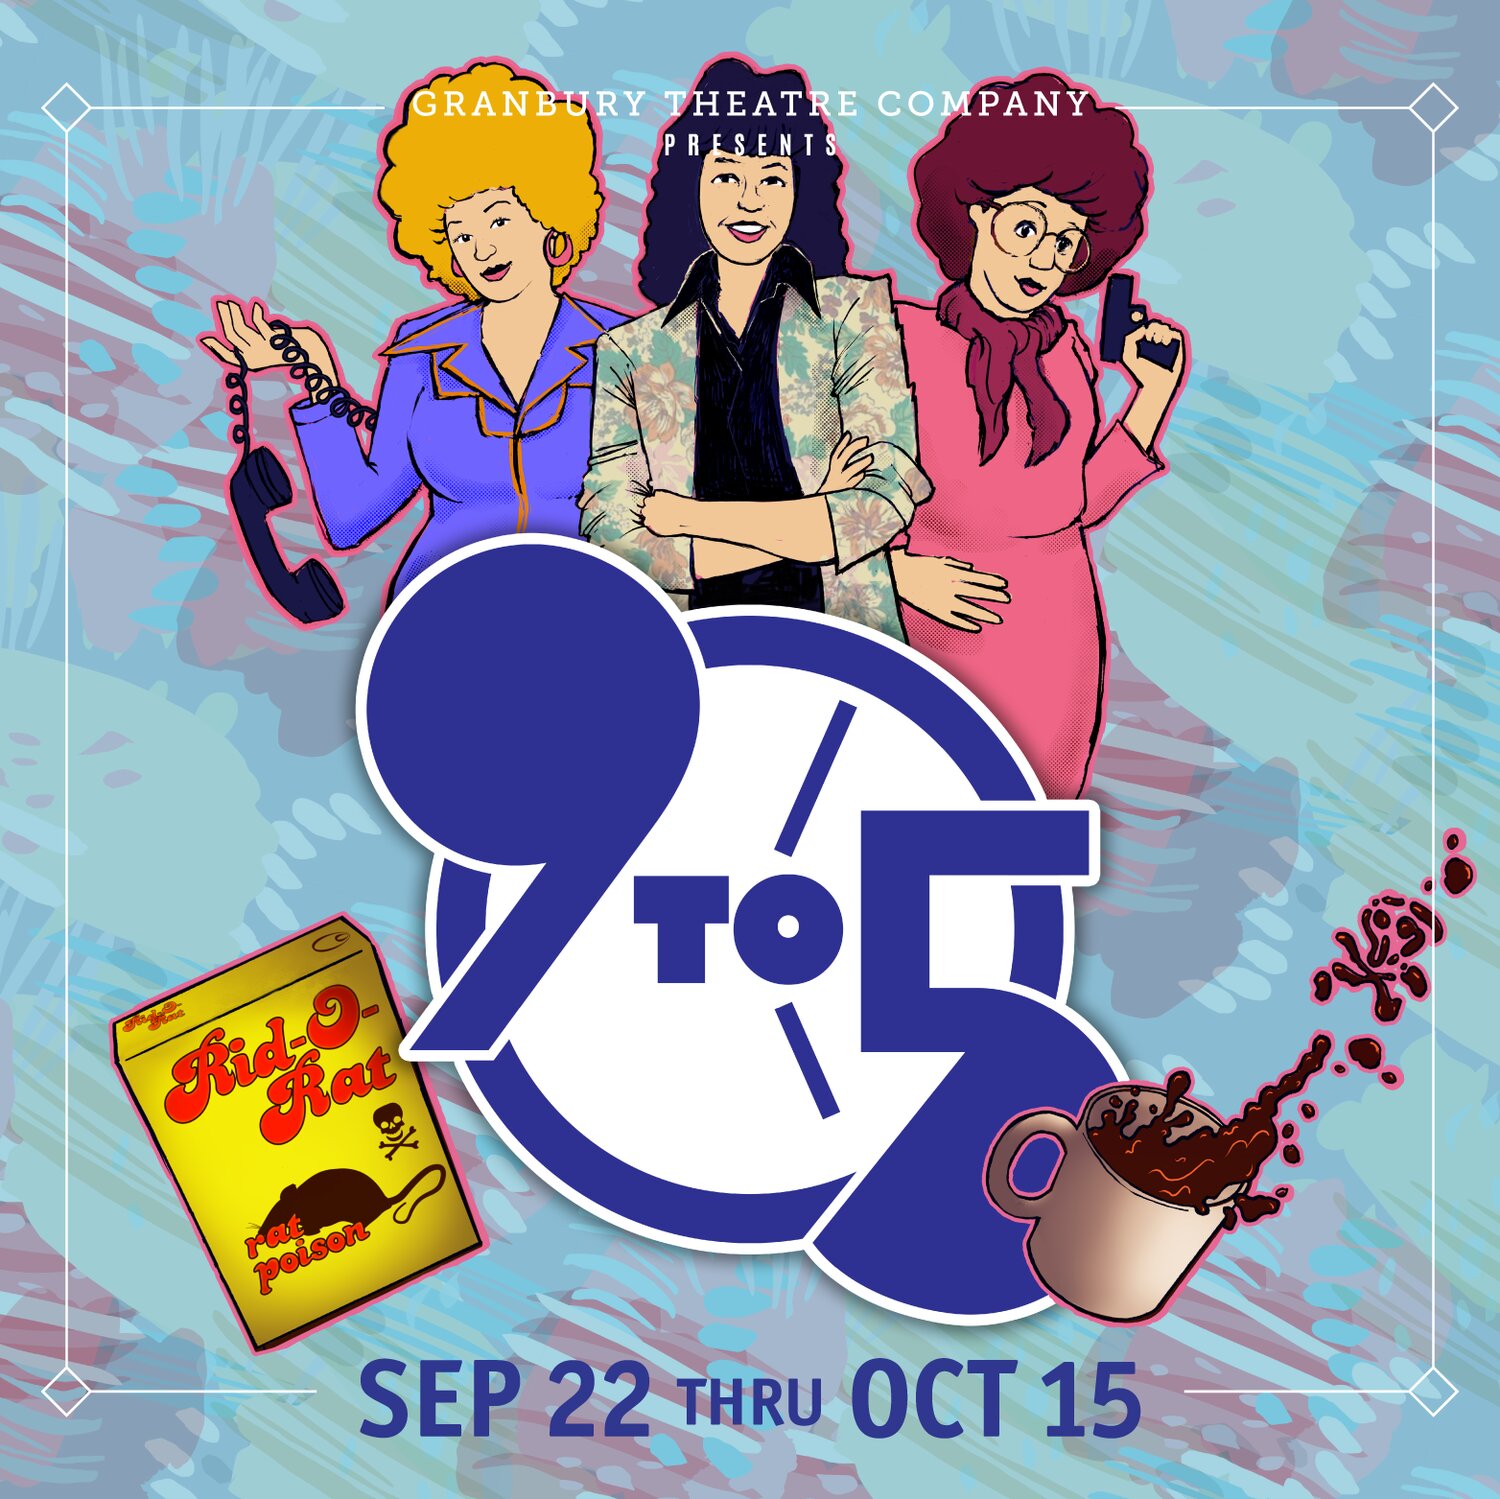 The Granbury Theatre Company (GTC) will continue its Broadway on the Brazos season with “9 to 5” Sept. 22 to Oct. 15, 2023, at the historic Granbury Opera House in Downtown Granbury.